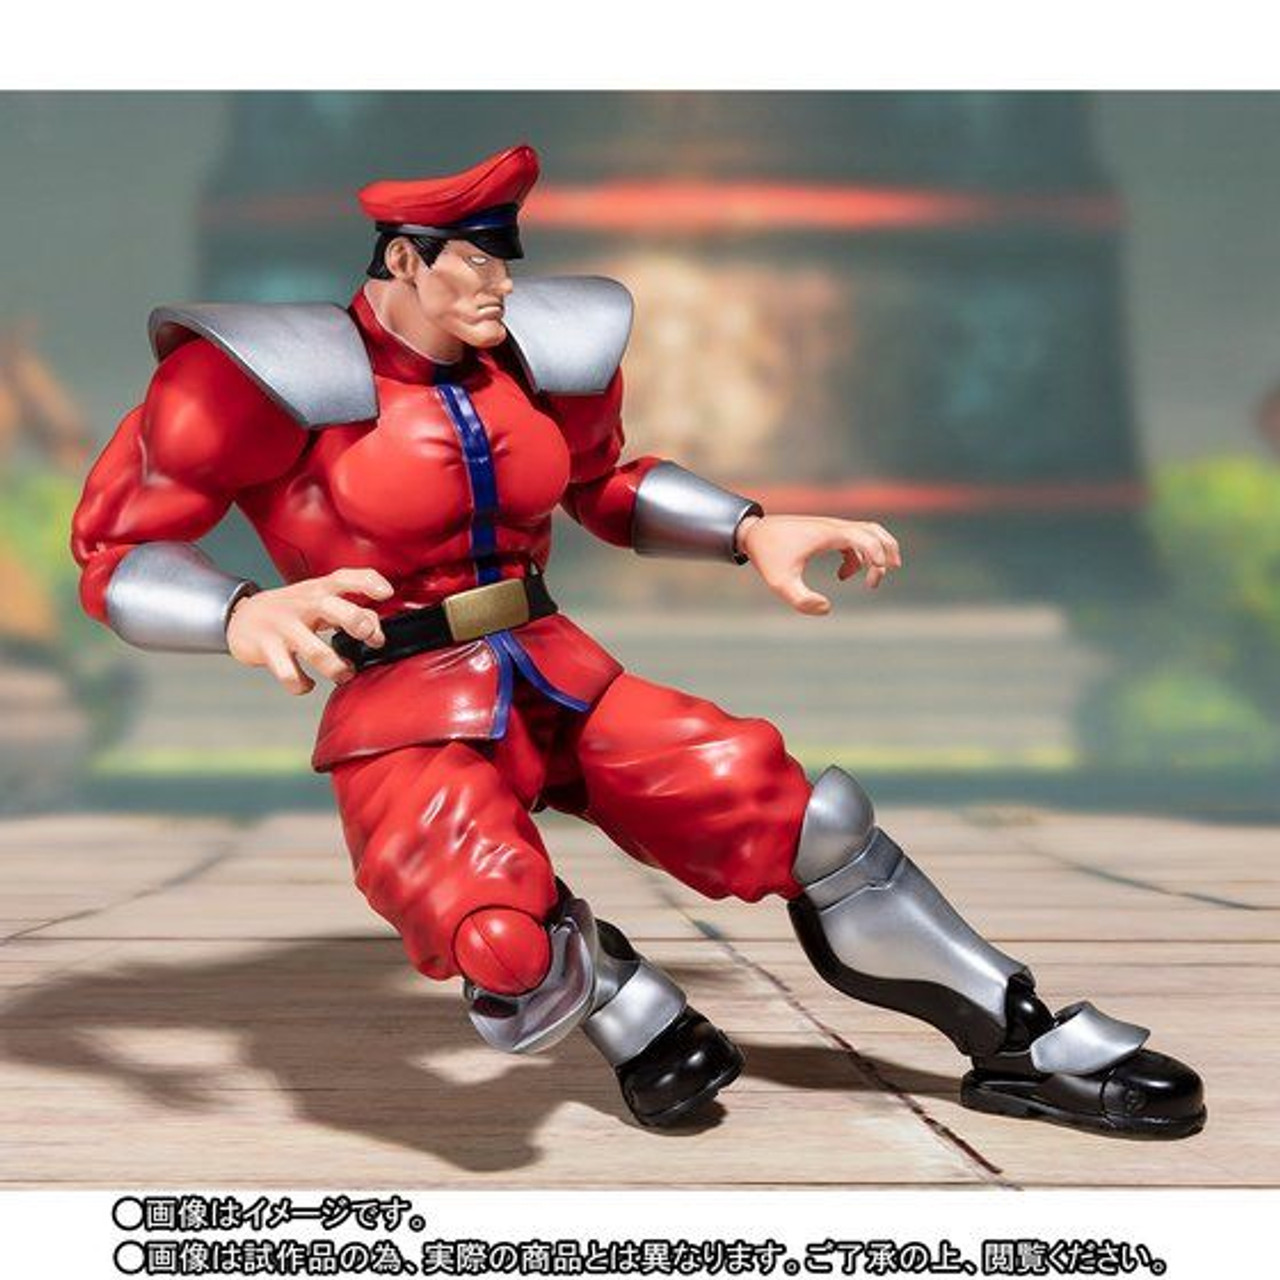 S.H. Figuarts Street Fighter Vega Figure Video Review And Images